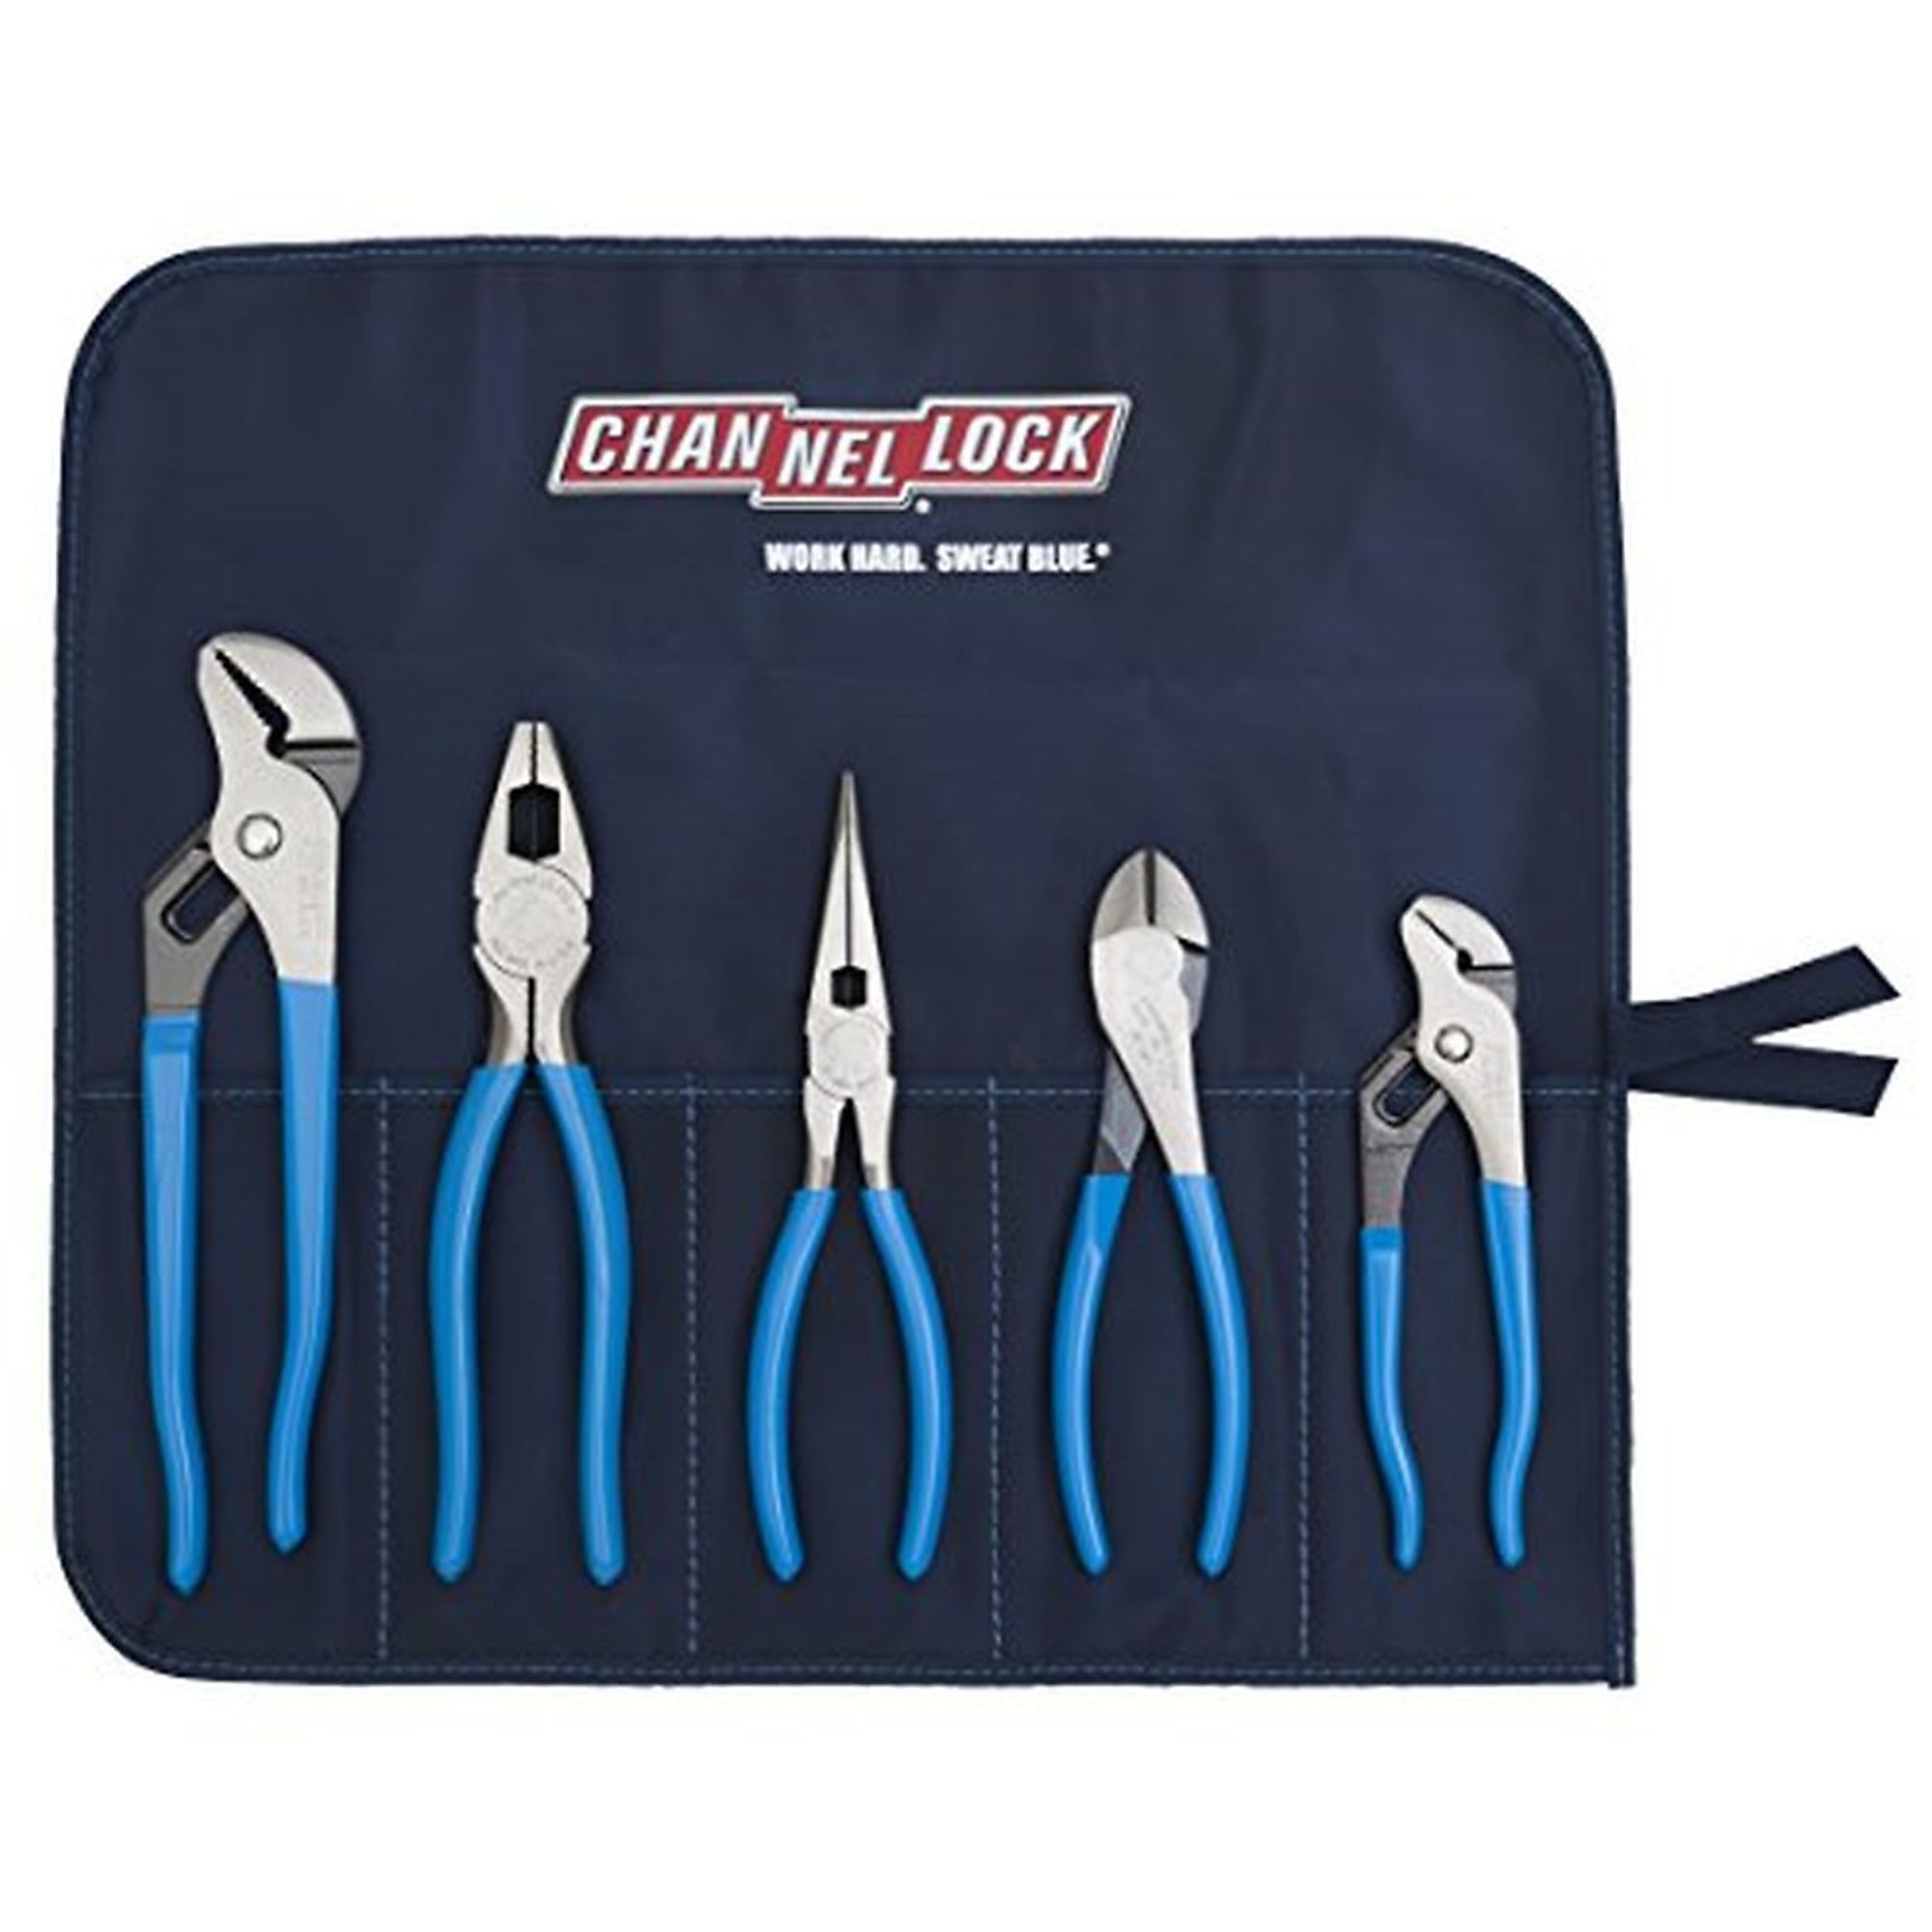 Channellock, 5 piece Professional Tool Set, Model TOOL ROLL-5